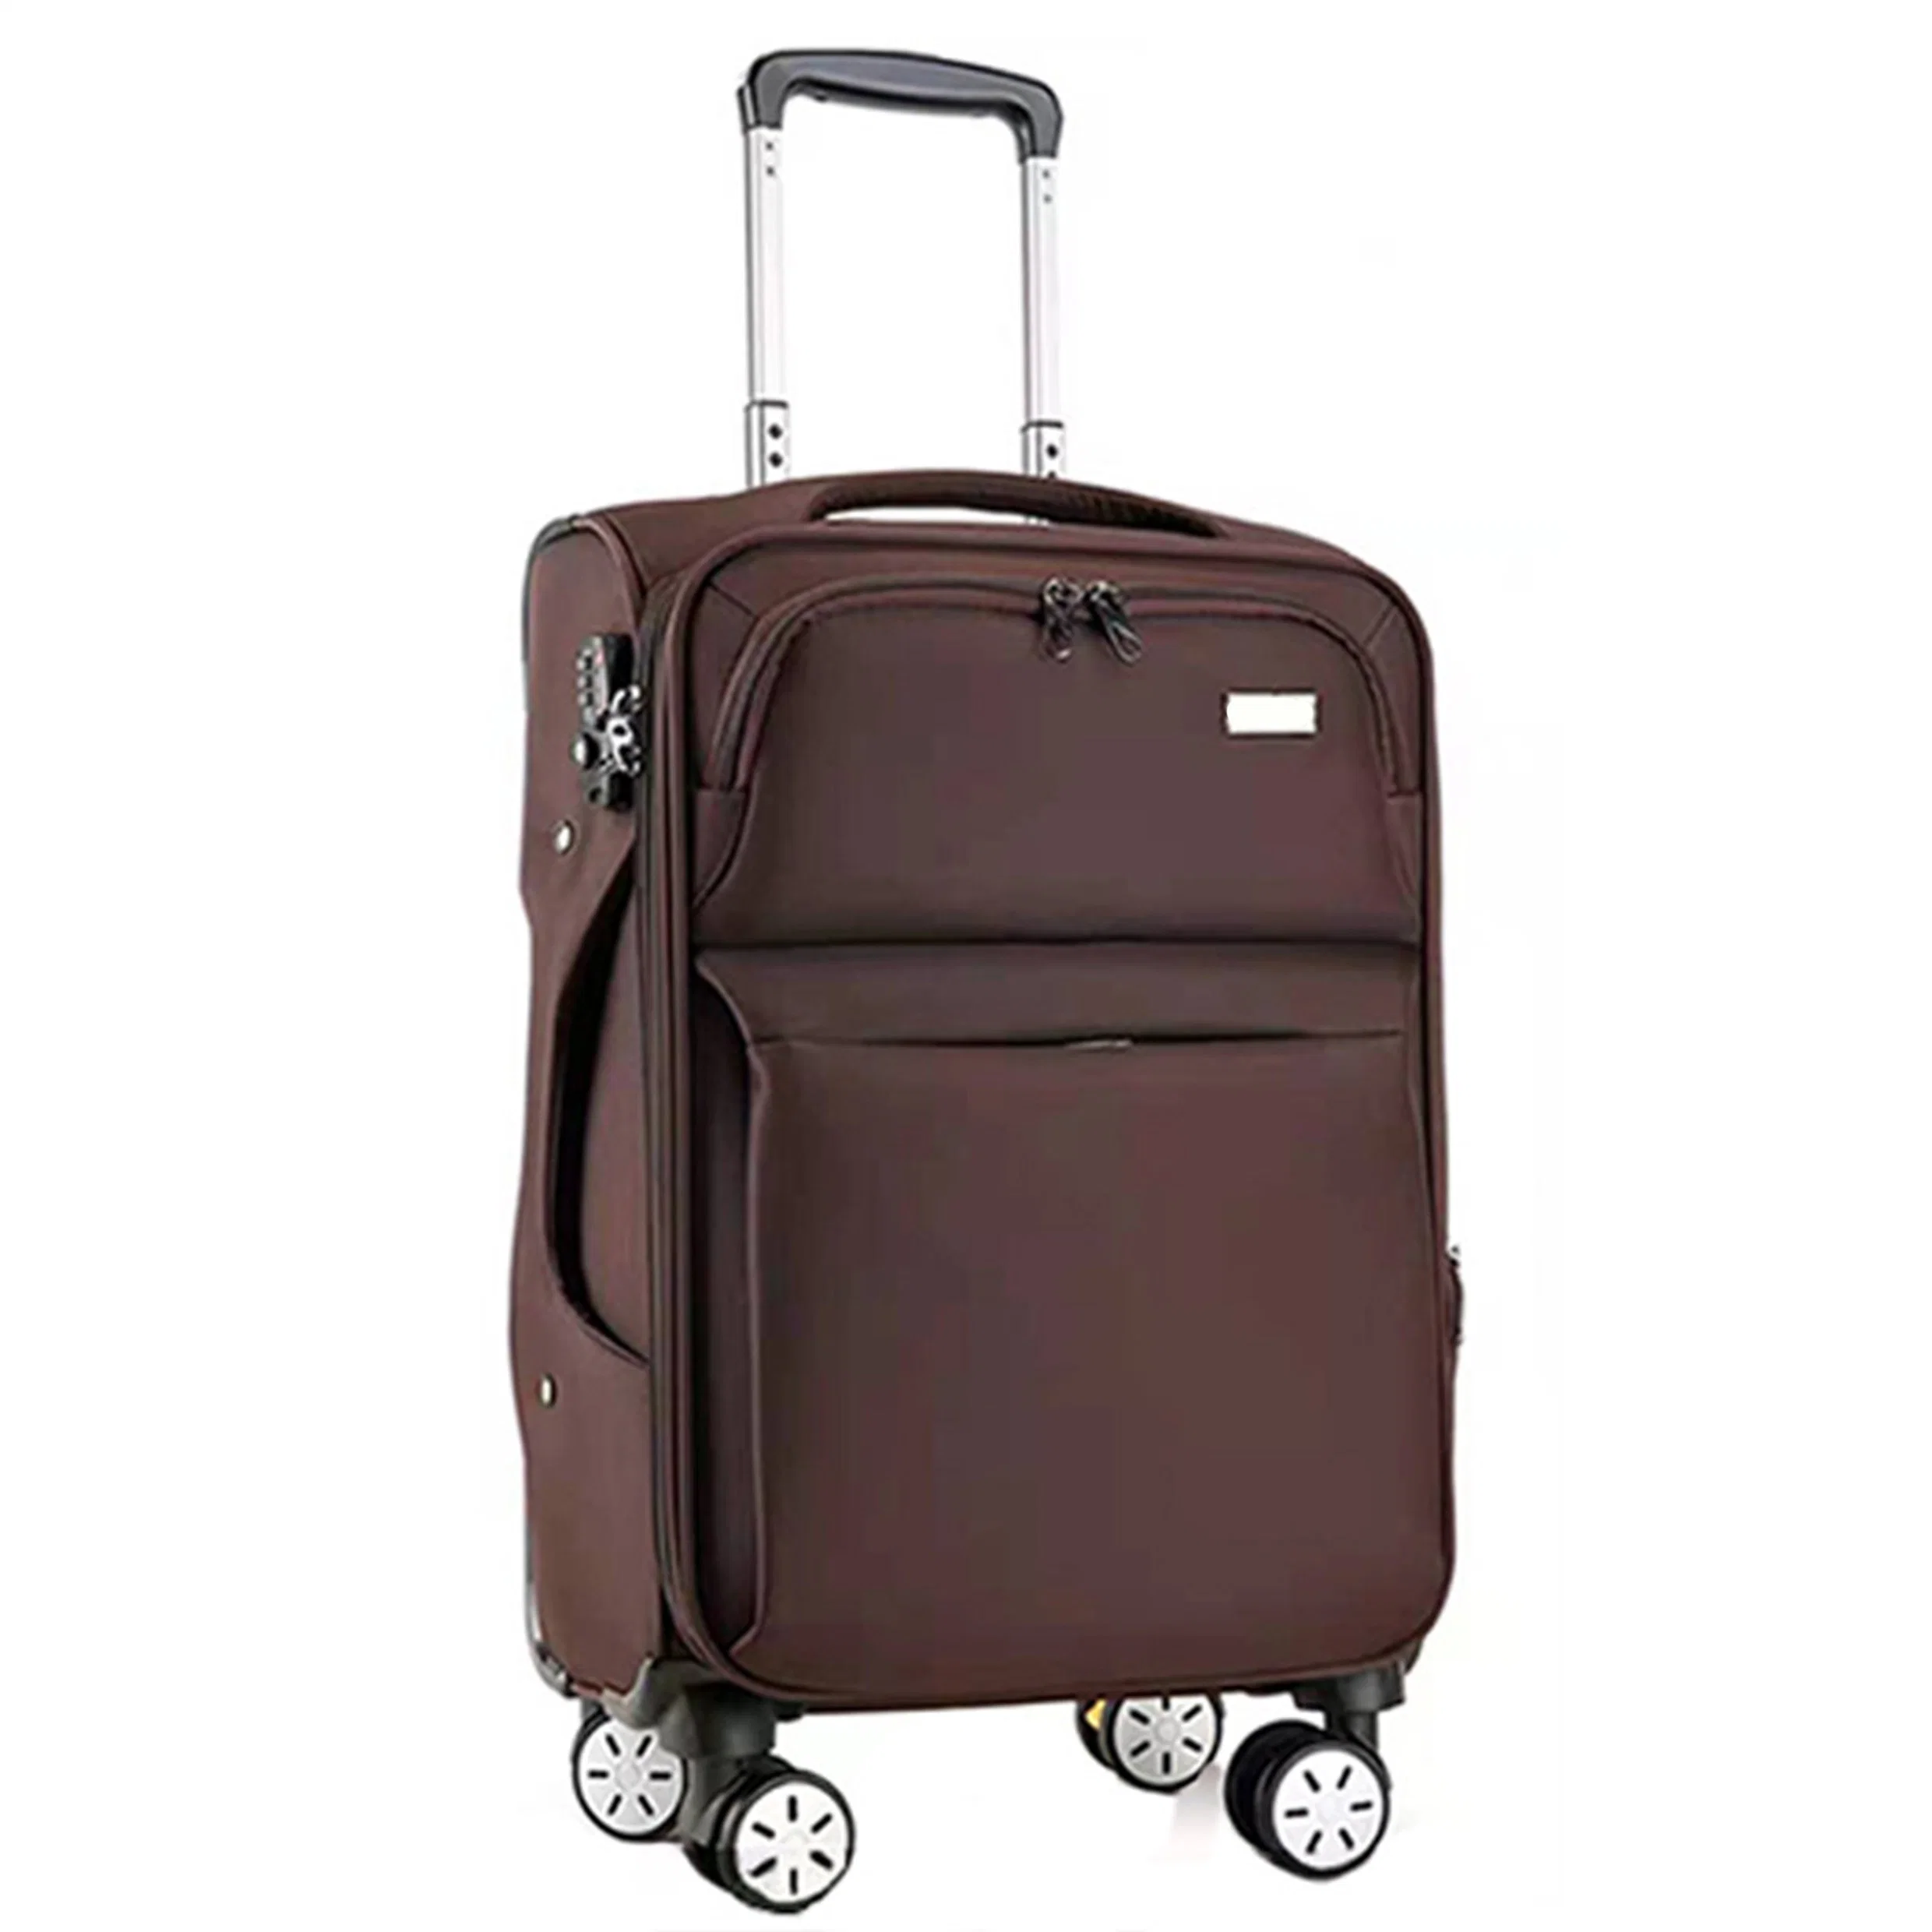 Travelling Bags Trolley Luggage Suitcases Sets Travel Suitcase Valigia Trolley Case Suitcase Travel Luggage Set for Outdoors